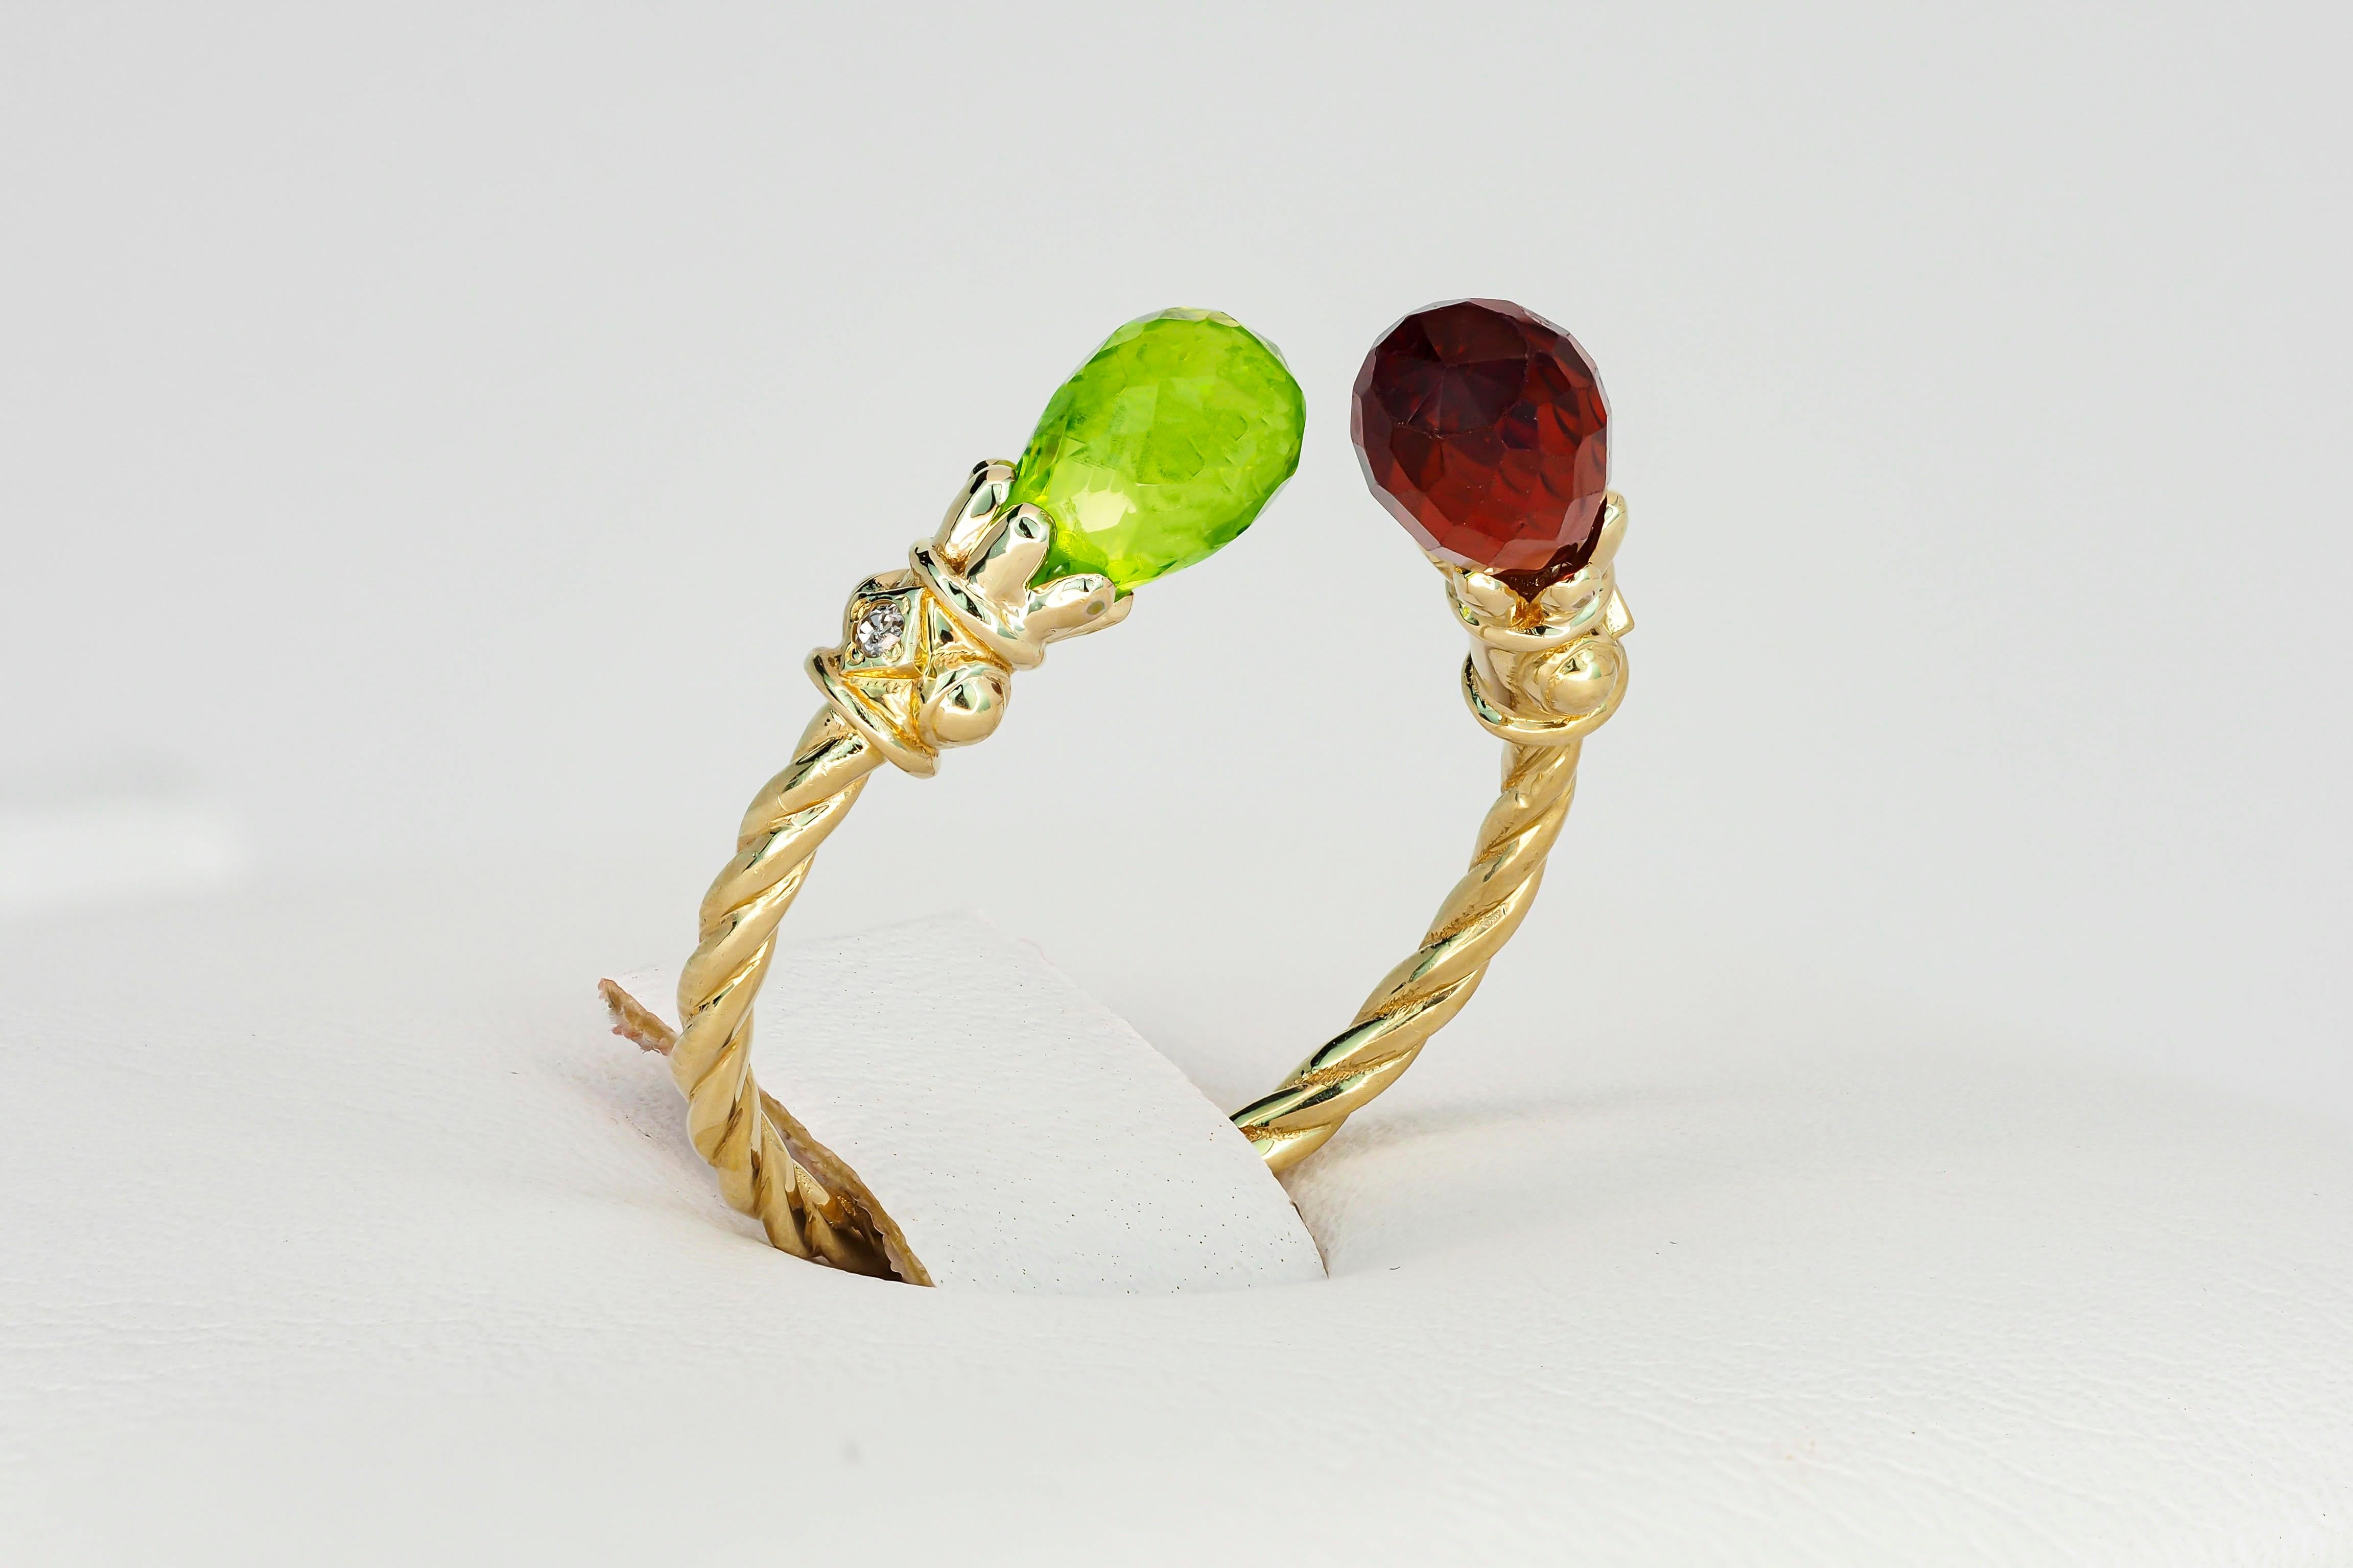 Open ended peridot, garnet 14k gold ring. 
Briolette gem gold ring. Garnet gold ring. Peridot gold ring. Adjustable gold ring.

Metal: 14k gold
Total weight: 2.60 g. depends from choosen size.

Stones: 

Peridot:
Cut: Briolette
Weight: approx 1.0